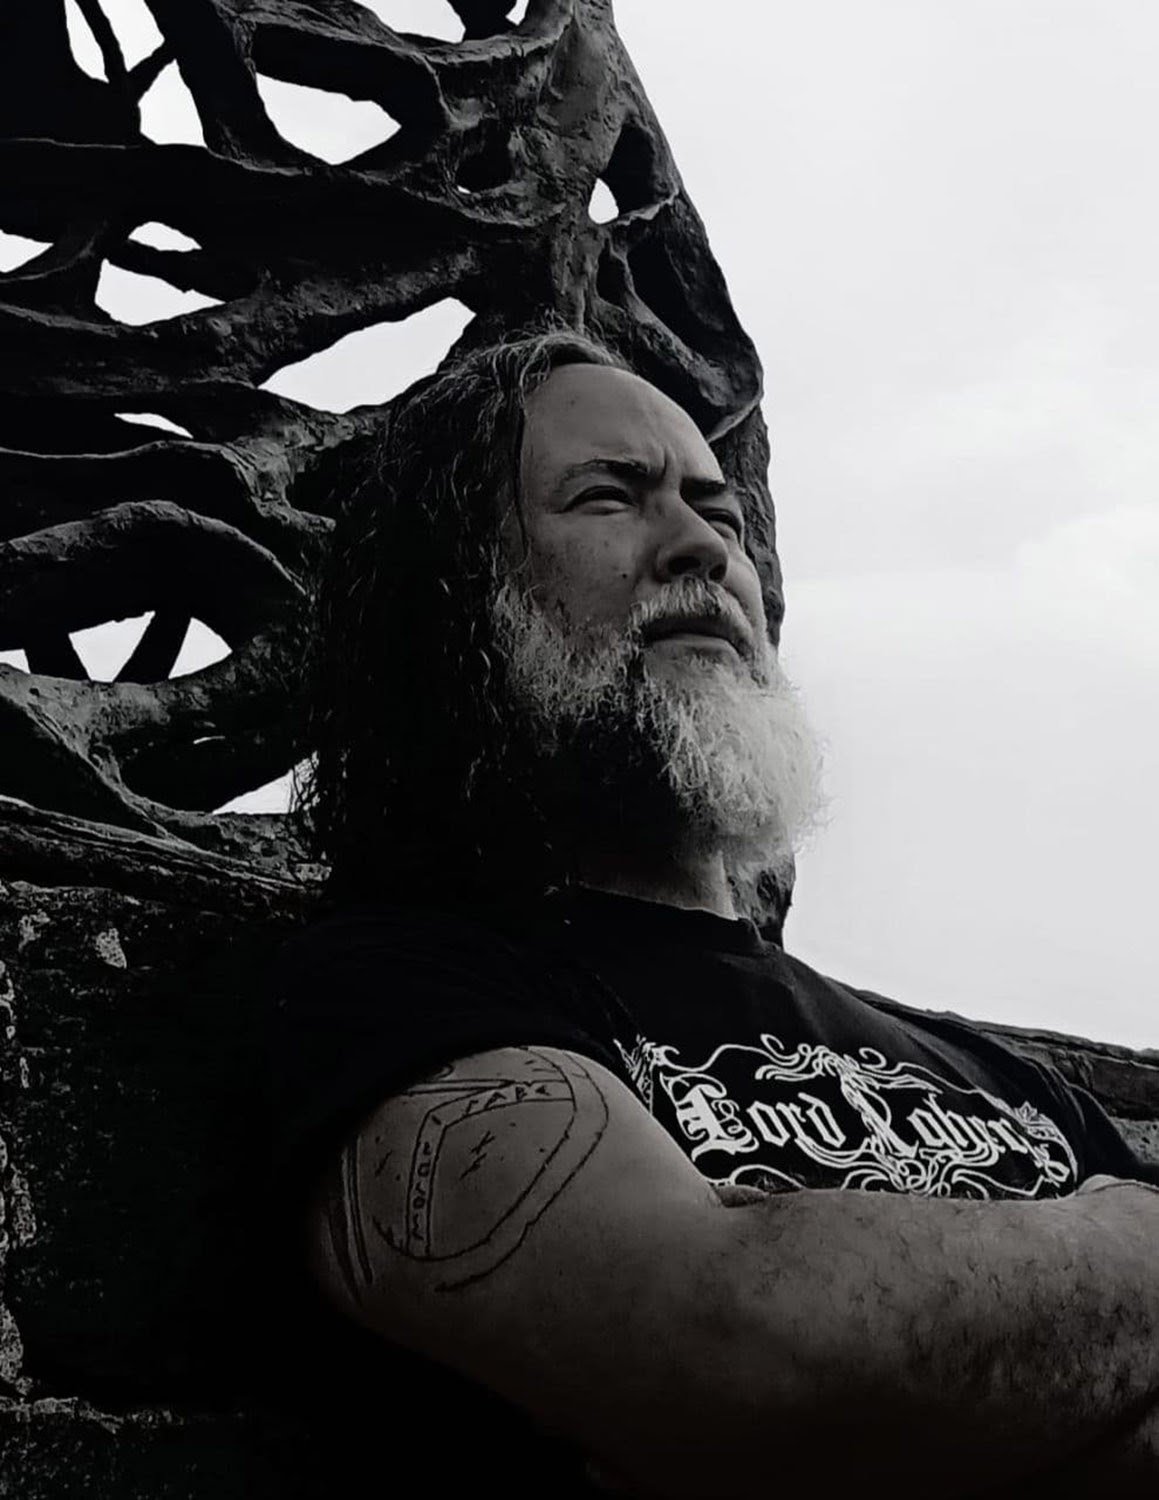 LORD AGHEROS returns with a new video for the song “The Walls Of Nowhere”.